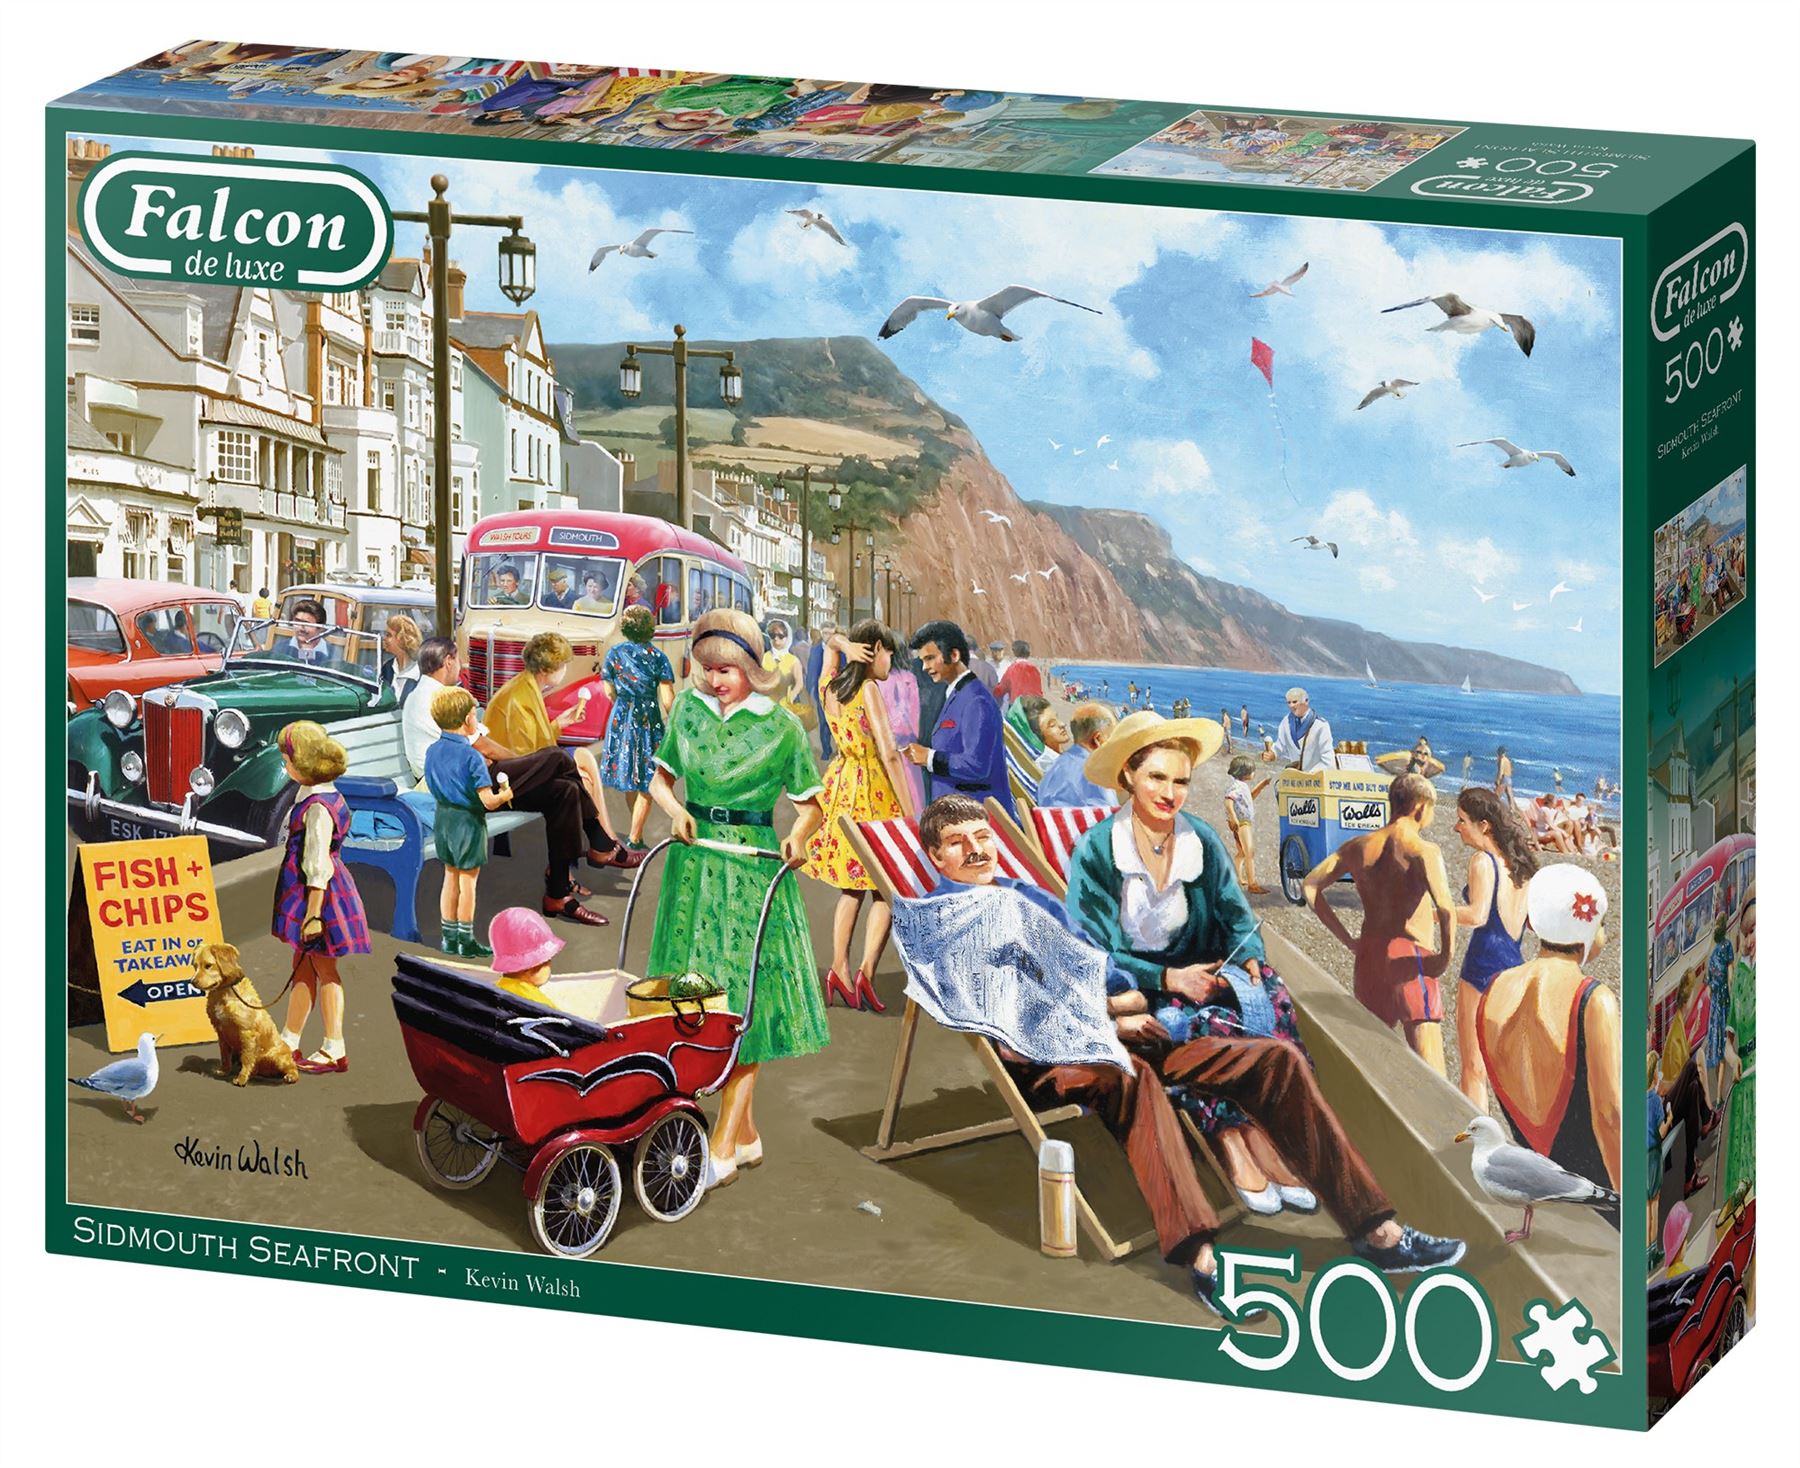 Sidmouth Seafront 500 Piece Jigsaw Puzzle box 2